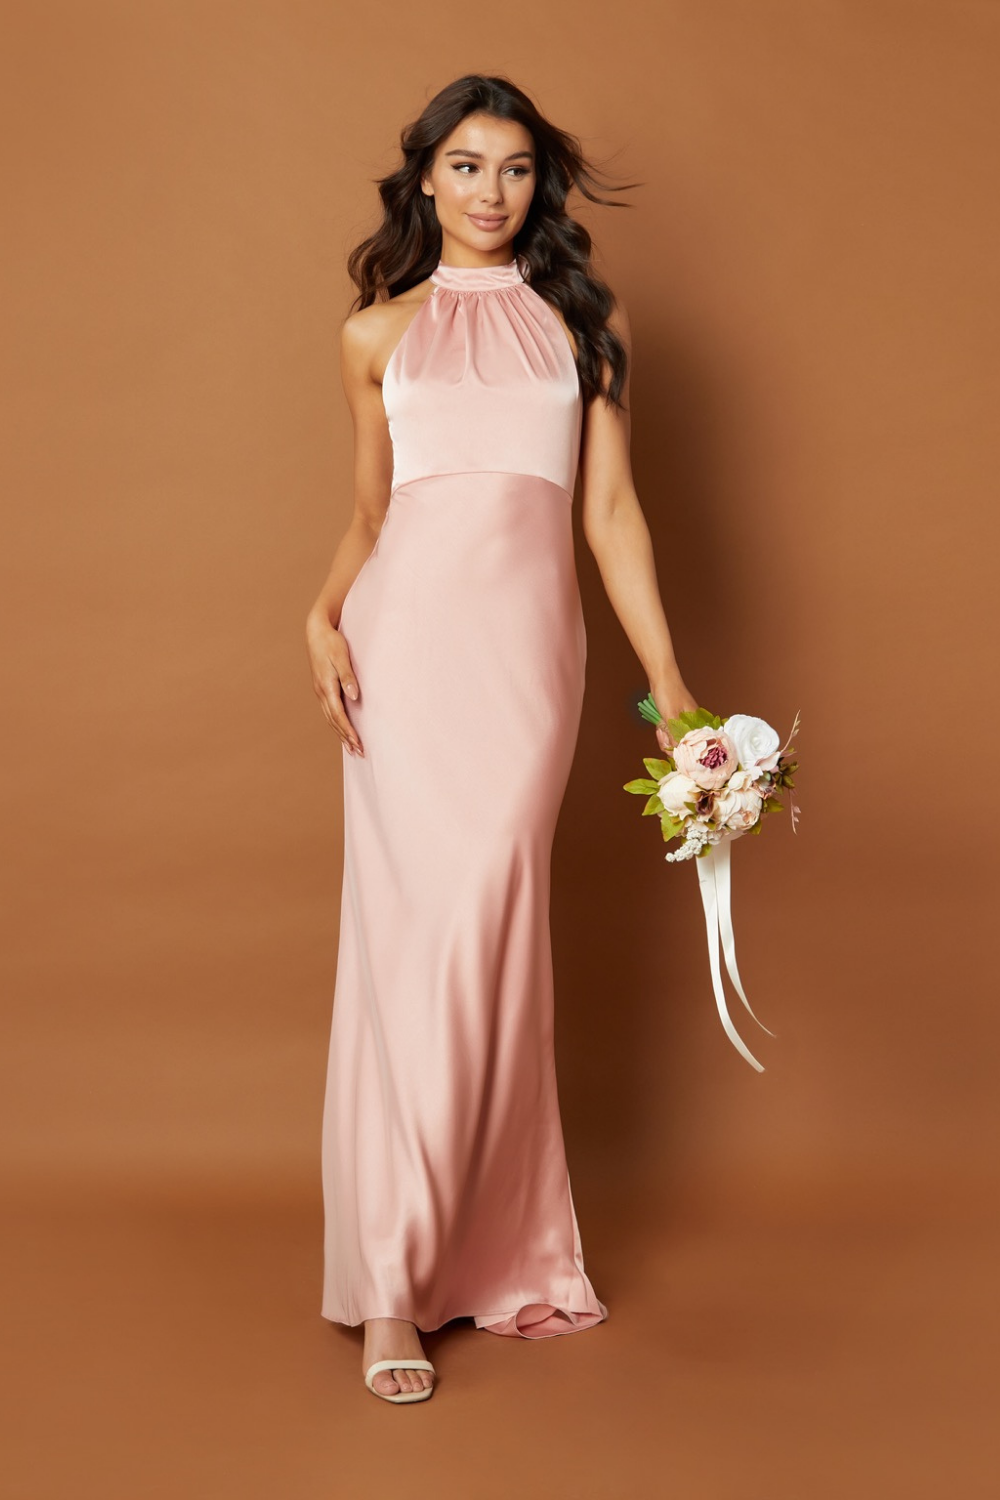 Starlette Halter Neck Maxi Dress with Back Tie and Button Back Detail, UK 14 / US 10 / EU 42 / Blush